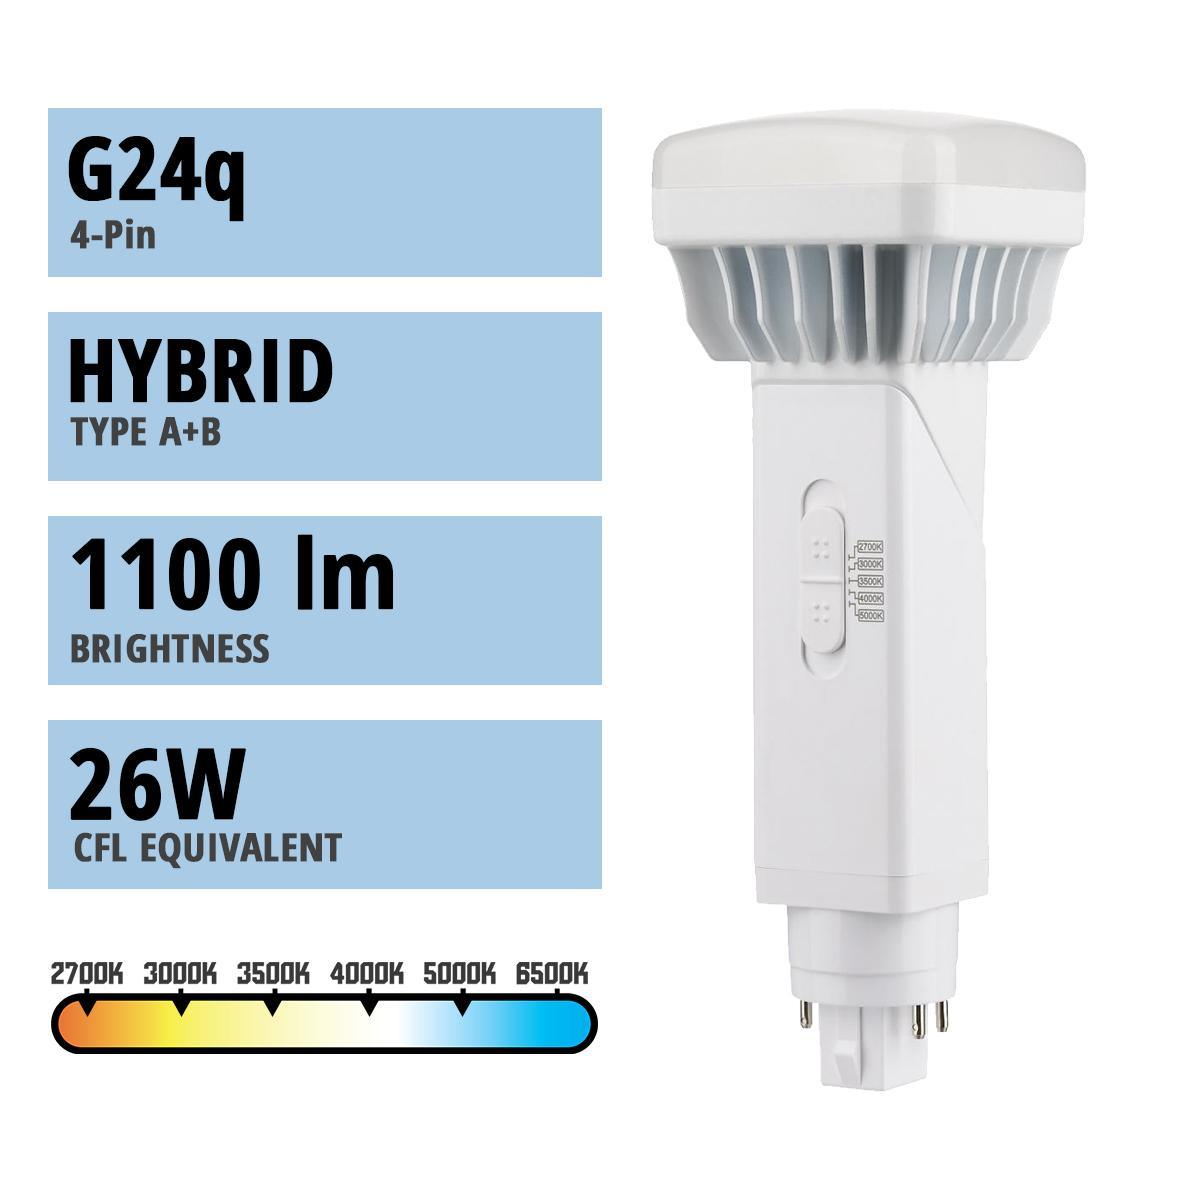 4 Pin PL LED Bulb, 9 Watt 1100 Lumens, Selectable CCT 2700K to 5000K, Universal, Replaces 26W CFL, G24q Base, Direct Or Bypass